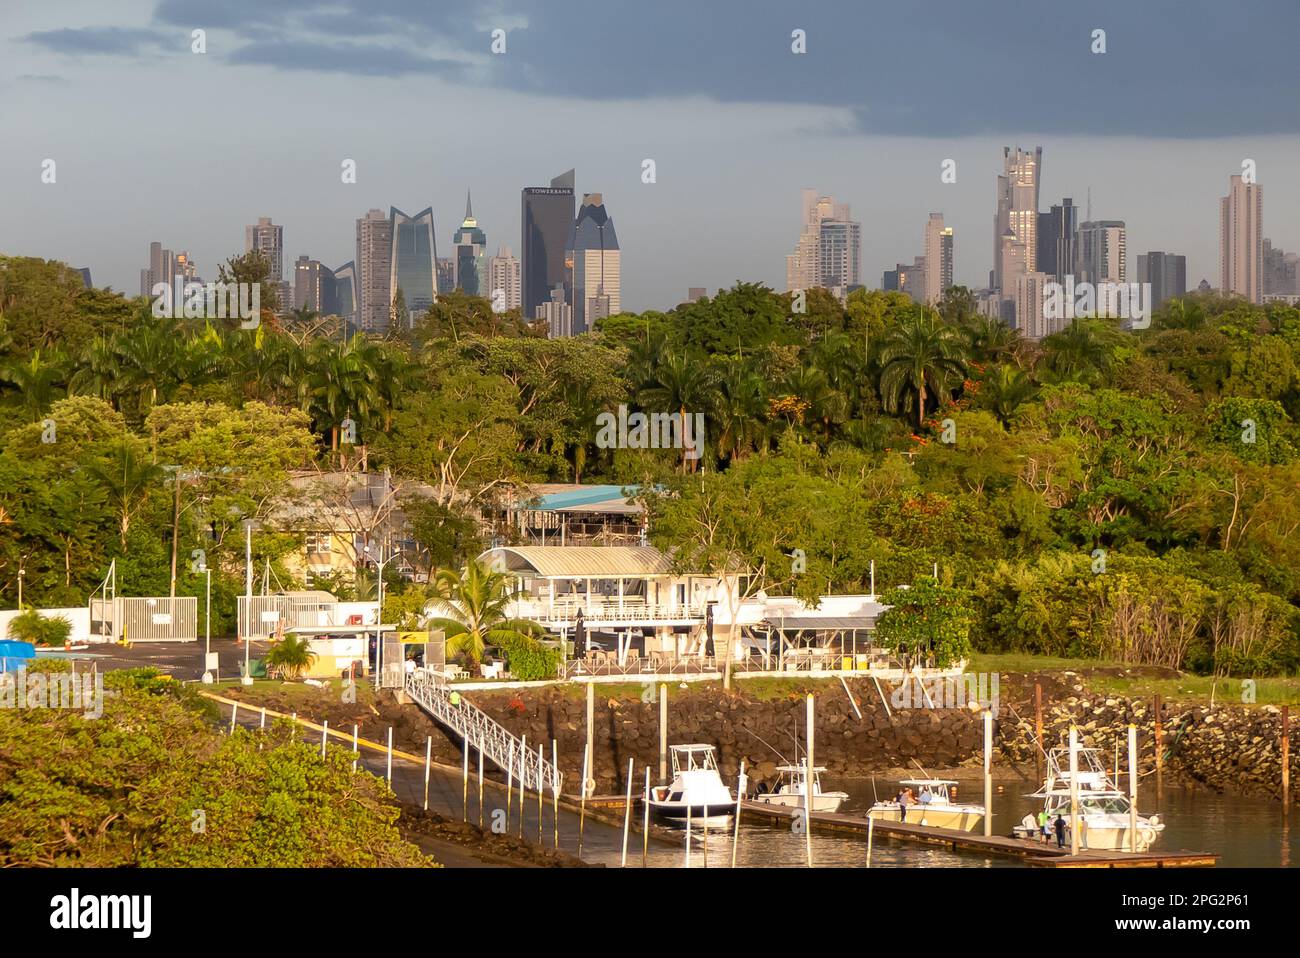 The Panama Canal: the high-rise towers of Panama City appearing above the rainforest. Stock Photo